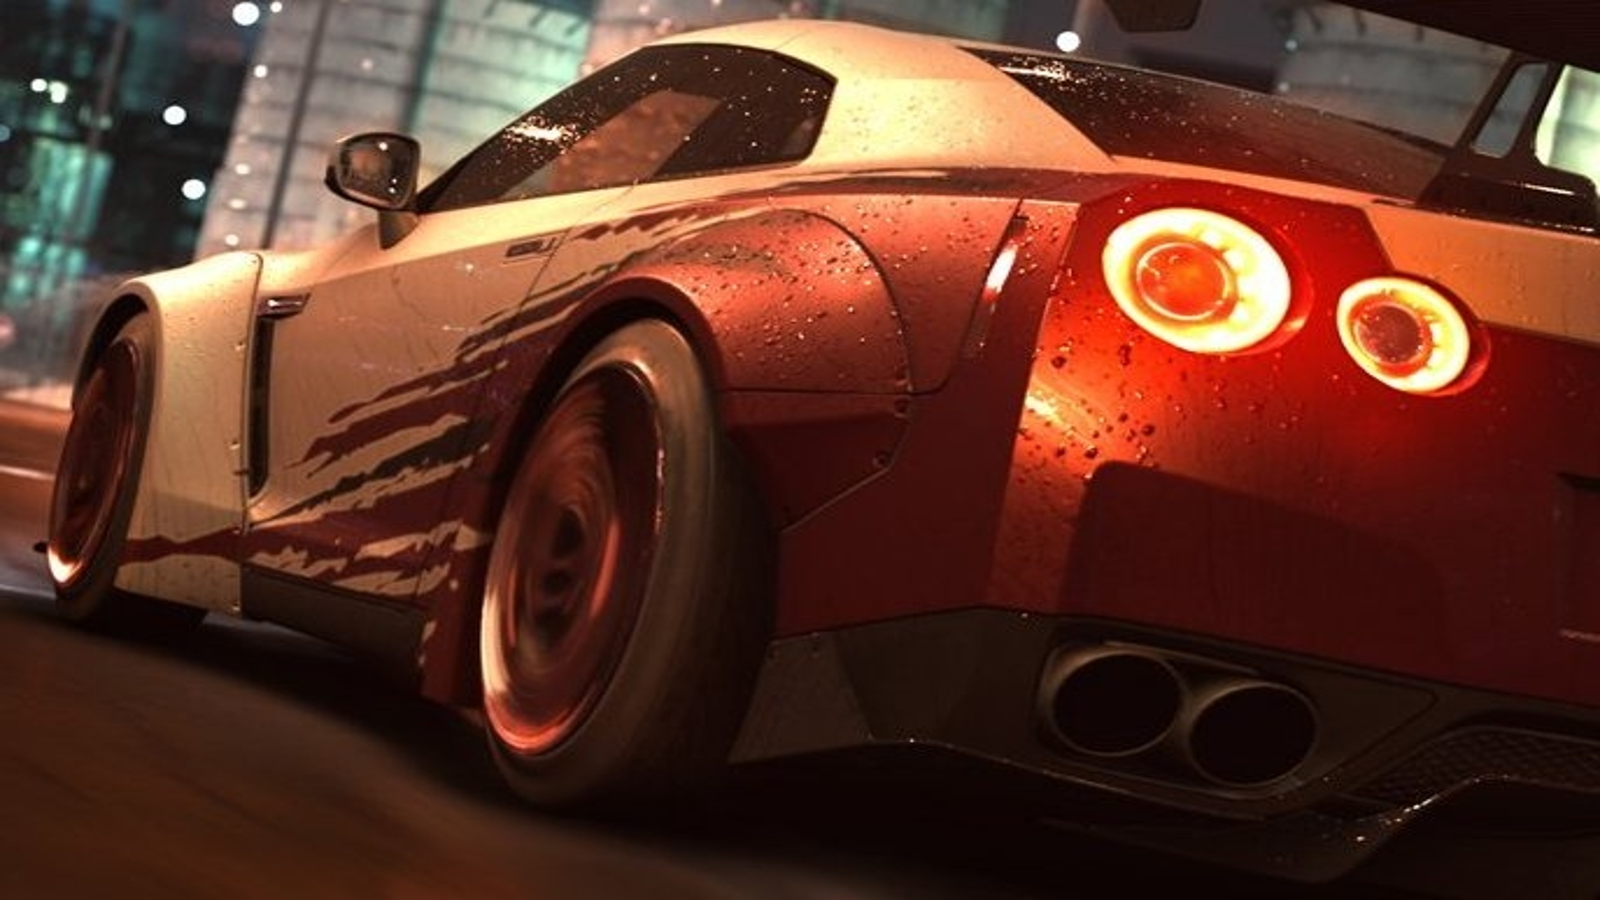 Jogo Need For Speed Game Br 2015 - Ps4